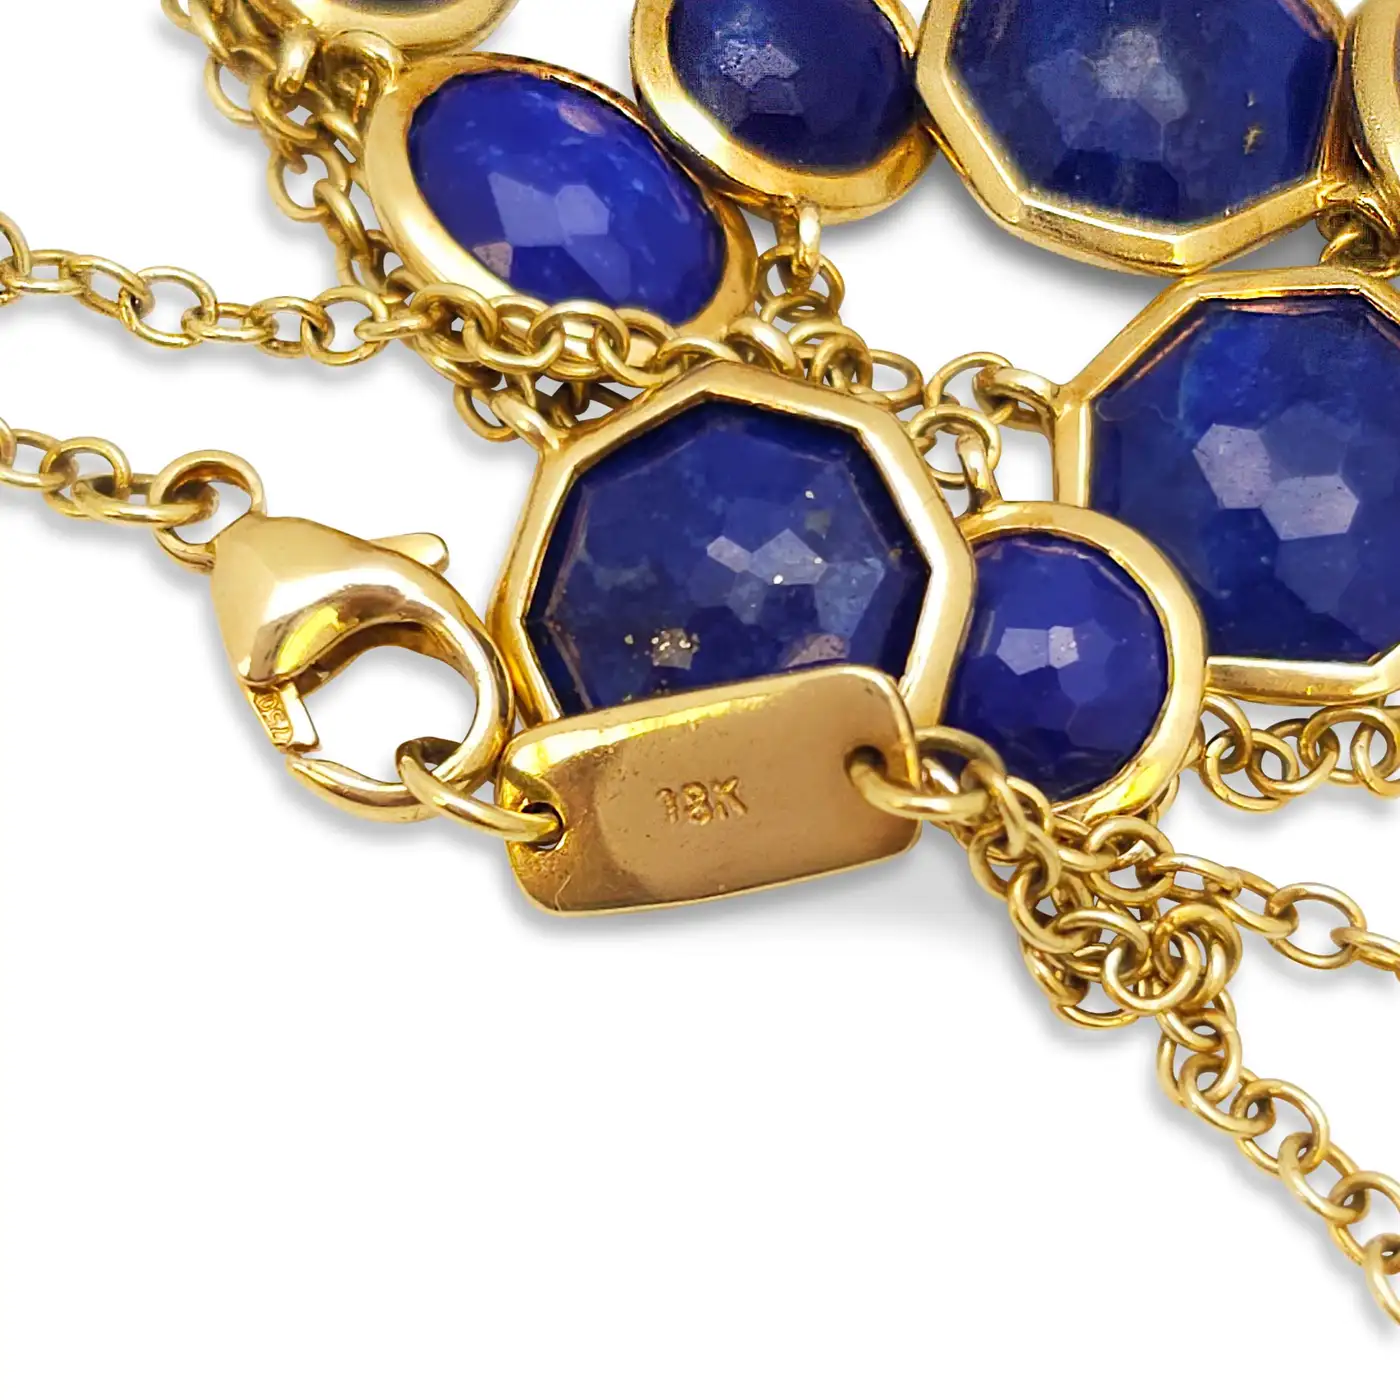 Ippolita-Rock-Sweets-Lolly-Gold-and-Lapis-Necklace-2.webp